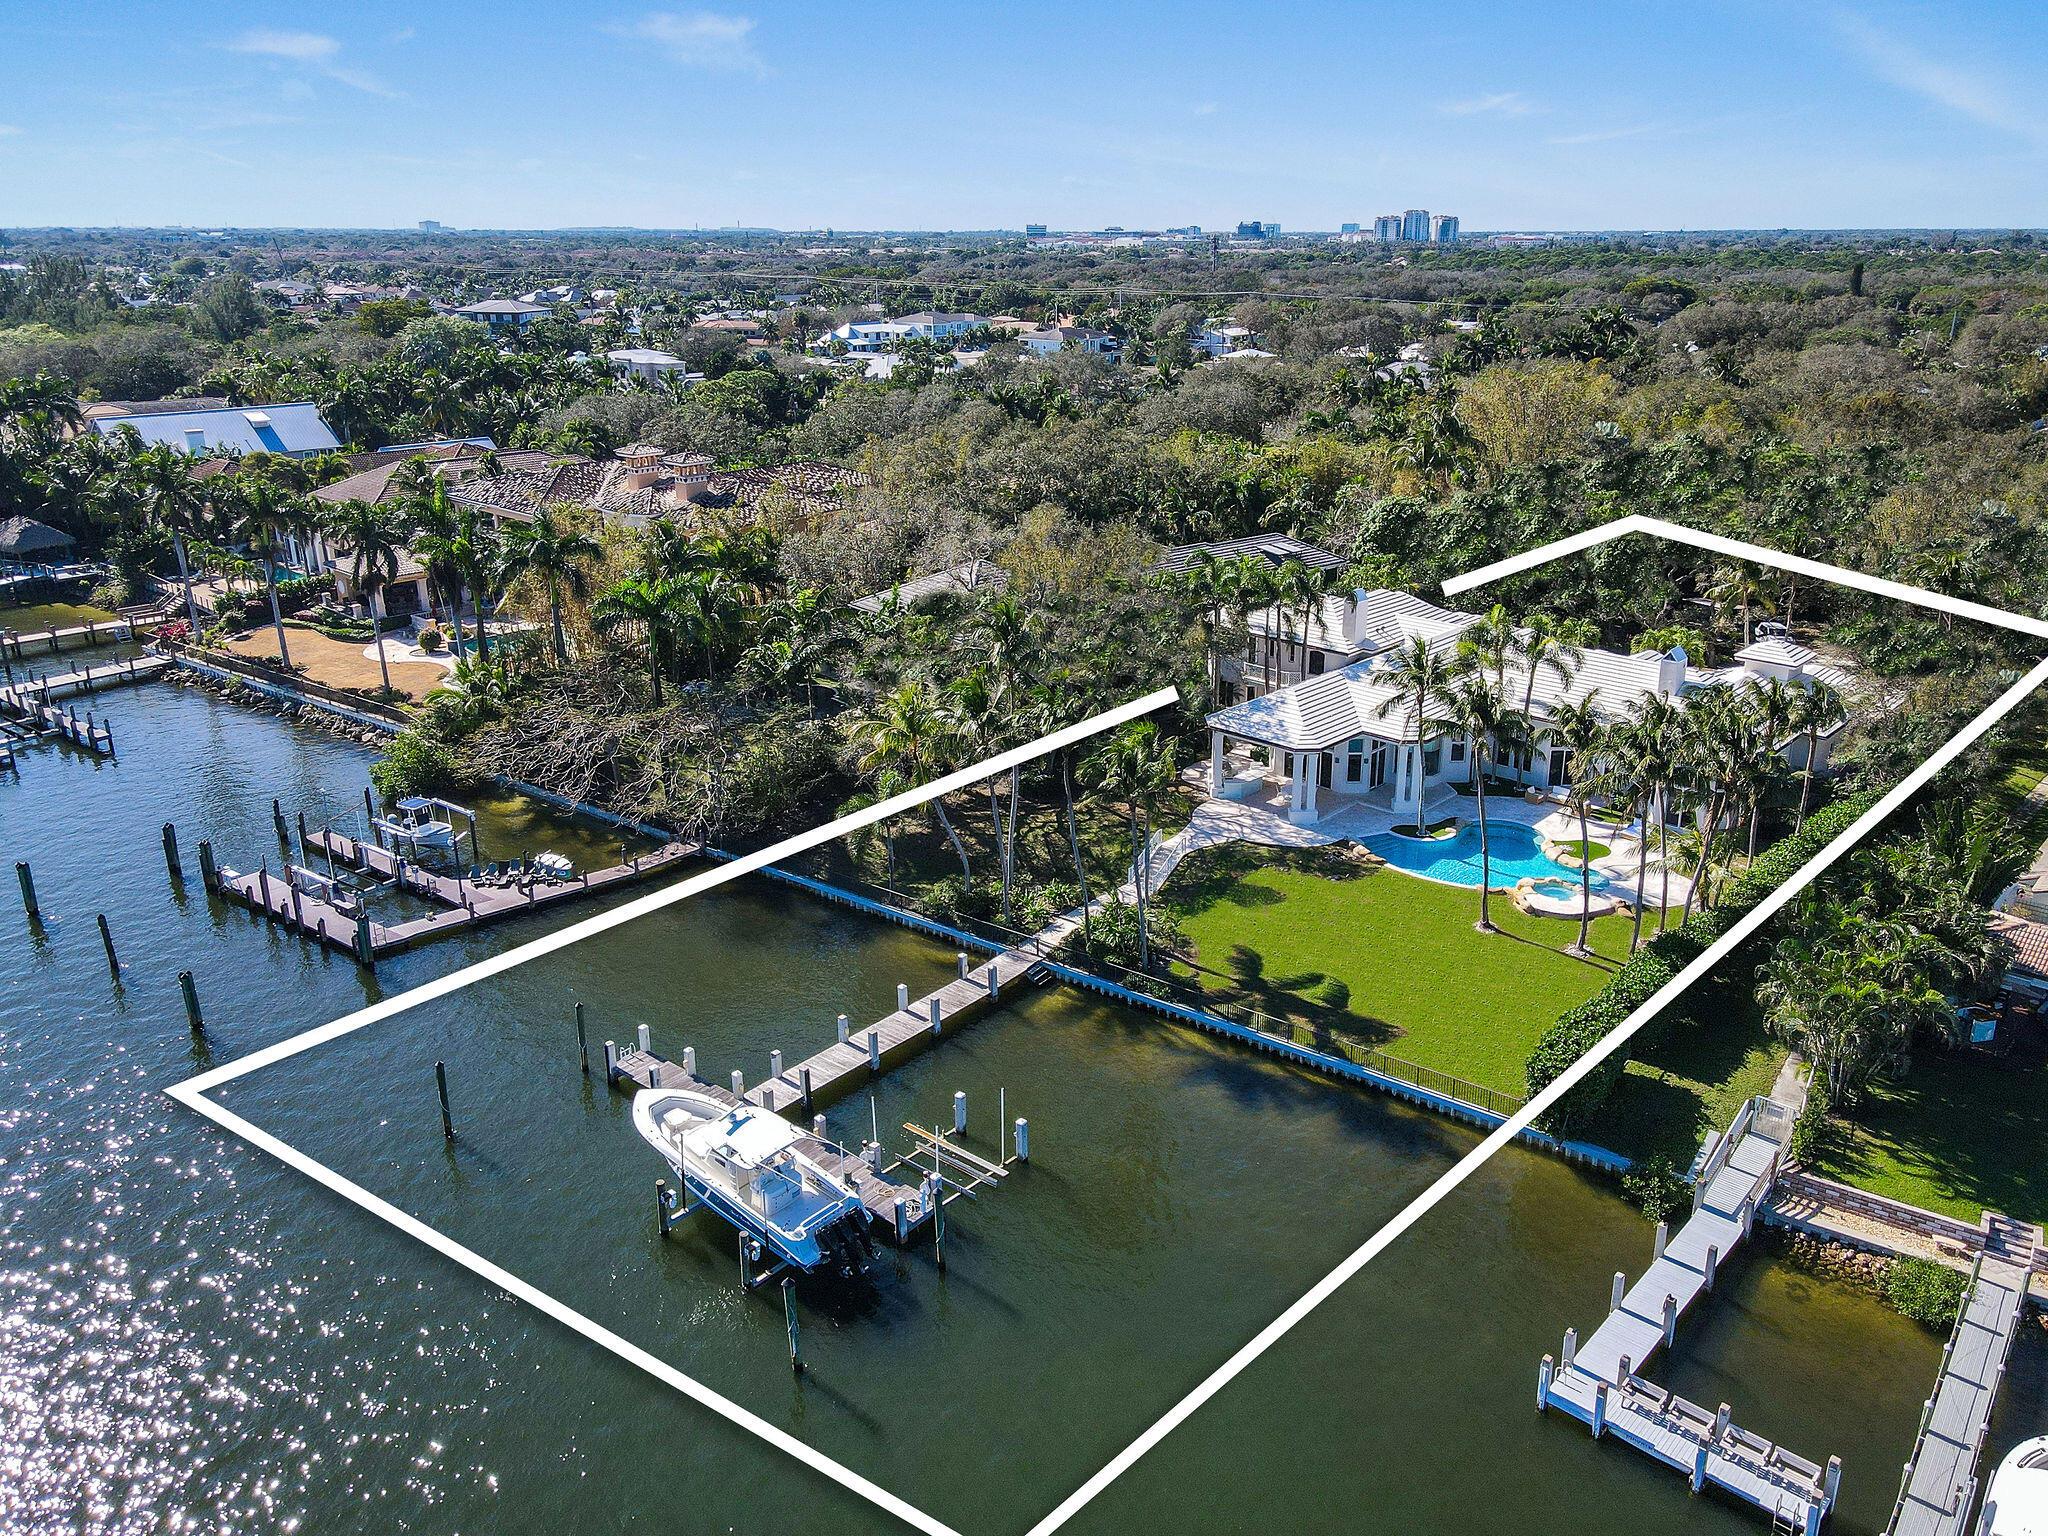 Truly one-of-a-kind! An exceptional opportunity to possess a well-established piece of direct intracoastal real estate in the heart of Palm Beach Gardens. Nestled perfectly on an elevated 1.04-acre lot, this privately gated expansive ranch estate has just undergone a complete and extensive renovation and was designed top to bottom by renowned interior designer Caitlin Kah Interiors, imbuing it with the freshness of new construction. Surrounded by meticulously maintained mature oak trees, this remarkable waterfront haven offers generous green views and an optimal eastern exposure breeze. Boasting an extremely rare 180 feet of deep-water intracoastal frontage, the property provides direct intracoastal action on a high and wide scale. Inside, new white oak wood floors, custom cabinetry, expertly designed lighting, wallpaper, window treatment, and finishes, a state-of-the-art chef's kitchen with top of line Wolf Subzero Miele appliances, and 25 ft soaring ceilings harmoniously blend elegance, comfort, and luxury at 2270 Wilsee Rd. 

The resort-style backyard features a pool and spa, turf grass, coconut palms, a summer kitchen, and outdoor living spaces with pesky cypress ceilings creating an expansive and inviting atmosphere seldom found in direct intracoastal living. Additional highlights include, brand new roof, full home automation control4 system lighting speakers camera etc, 4-car garage , new floors, new bathrooms, kitchen, impact windows, copper gutters and more